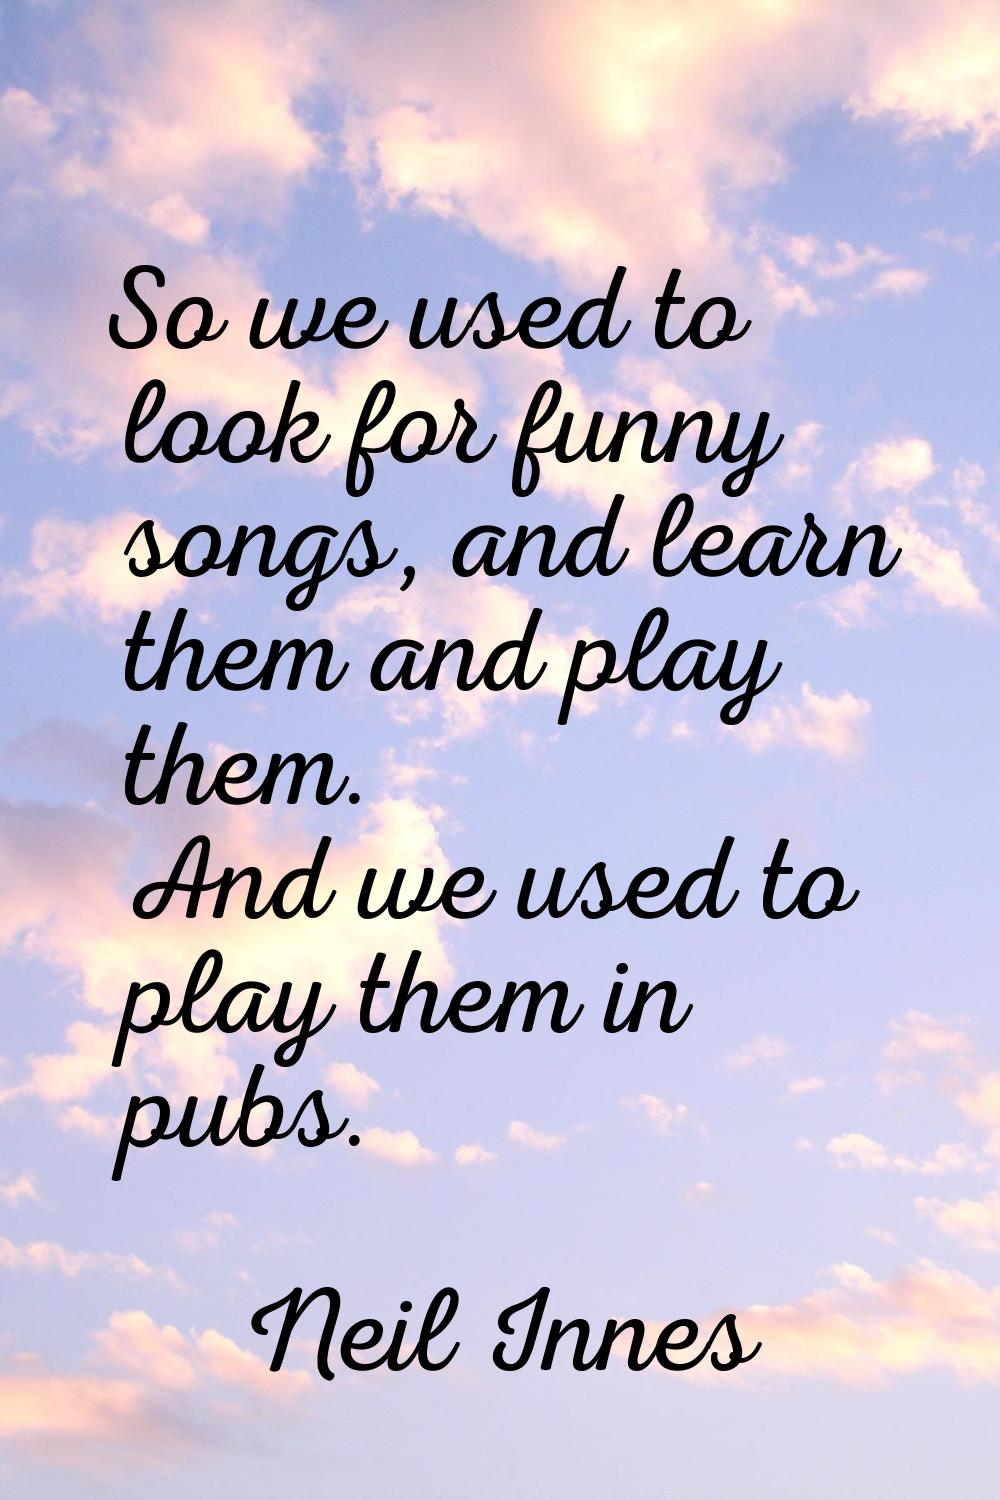 So we used to look for funny songs, and learn them and play them. And we used to play them in pubs.